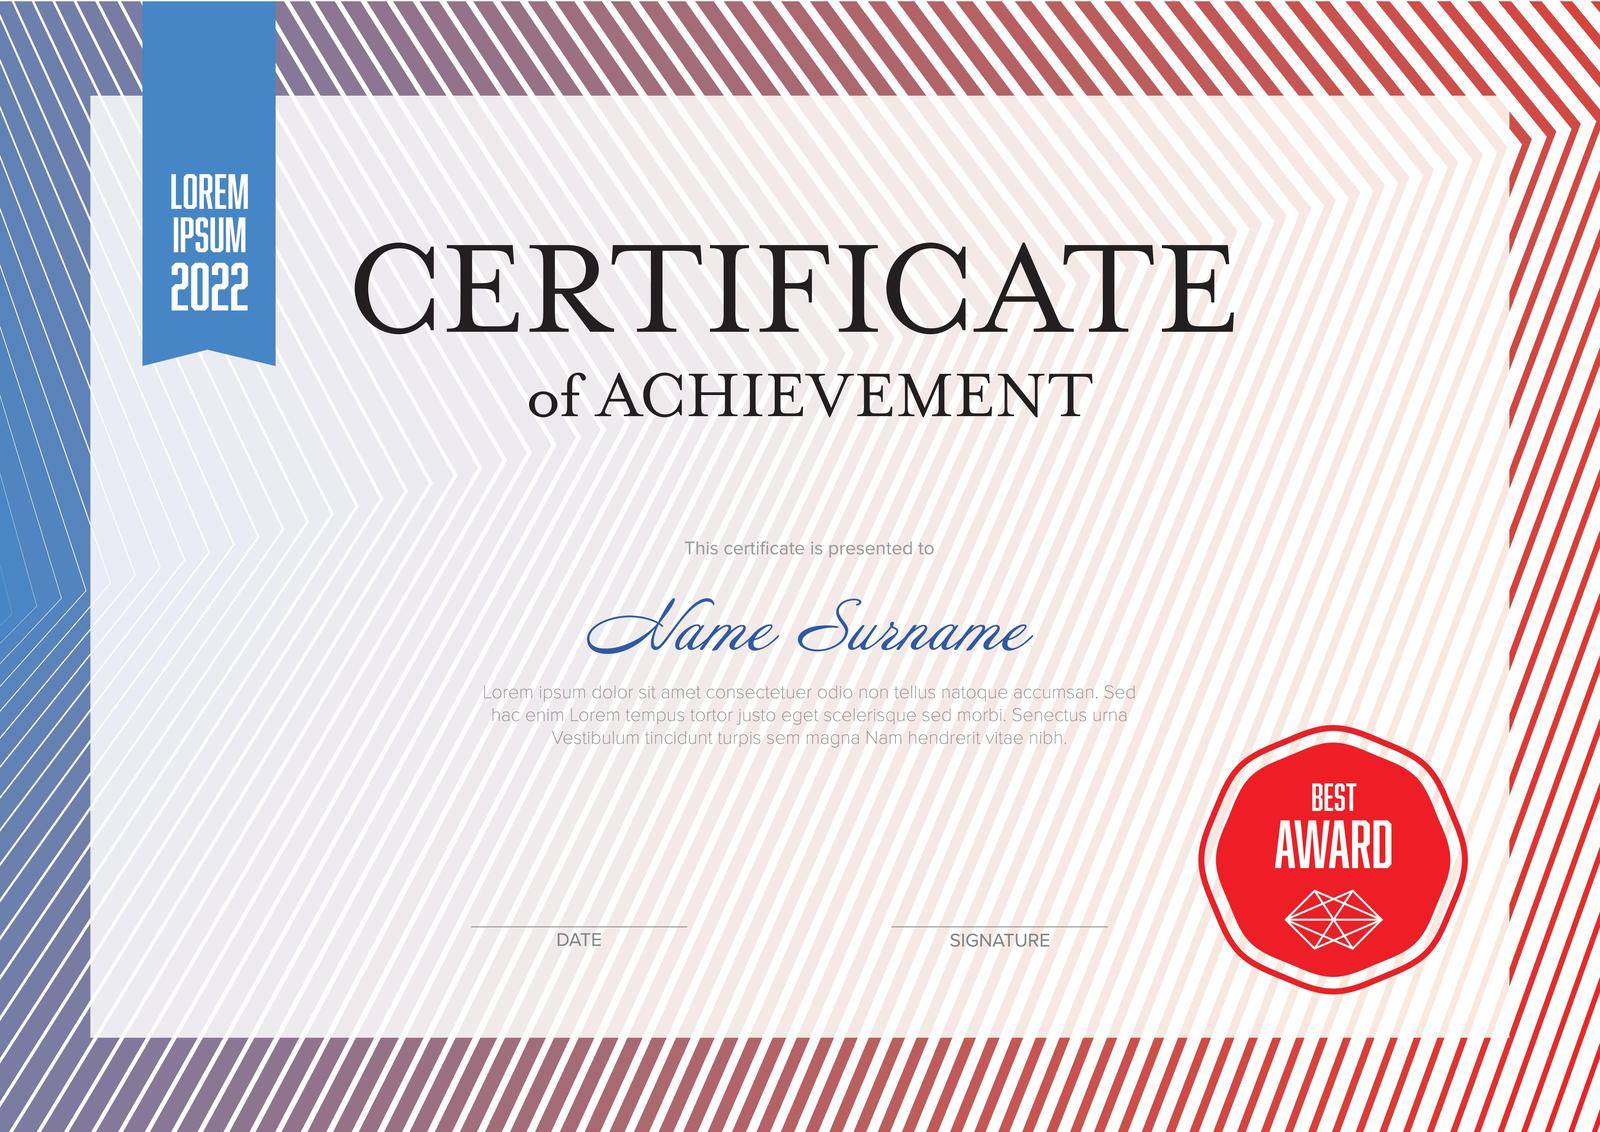 Modern certificate of achievement template with place for your content - blue red design. Light layout template for any premium certificate, diploma, graduation or achievement document for print